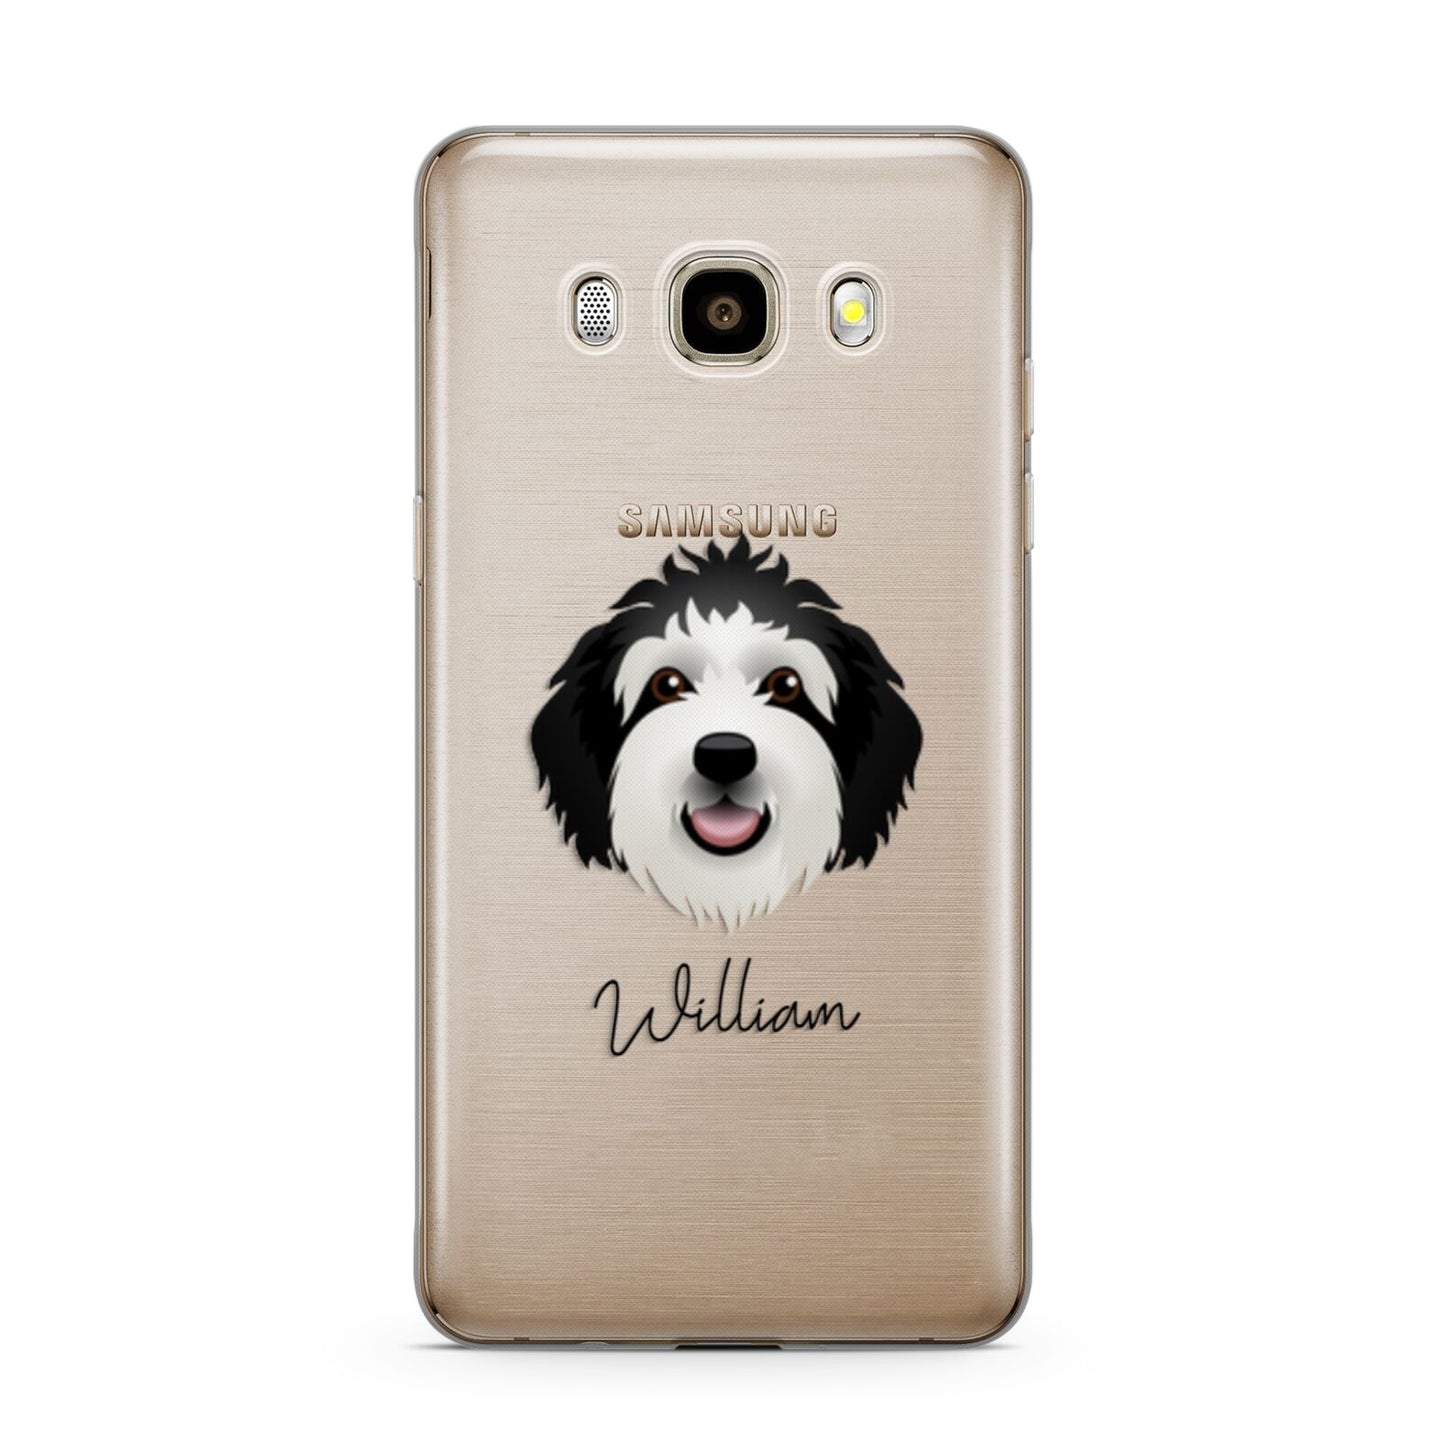 Sheepadoodle Personalised Samsung Galaxy J7 2016 Case on gold phone